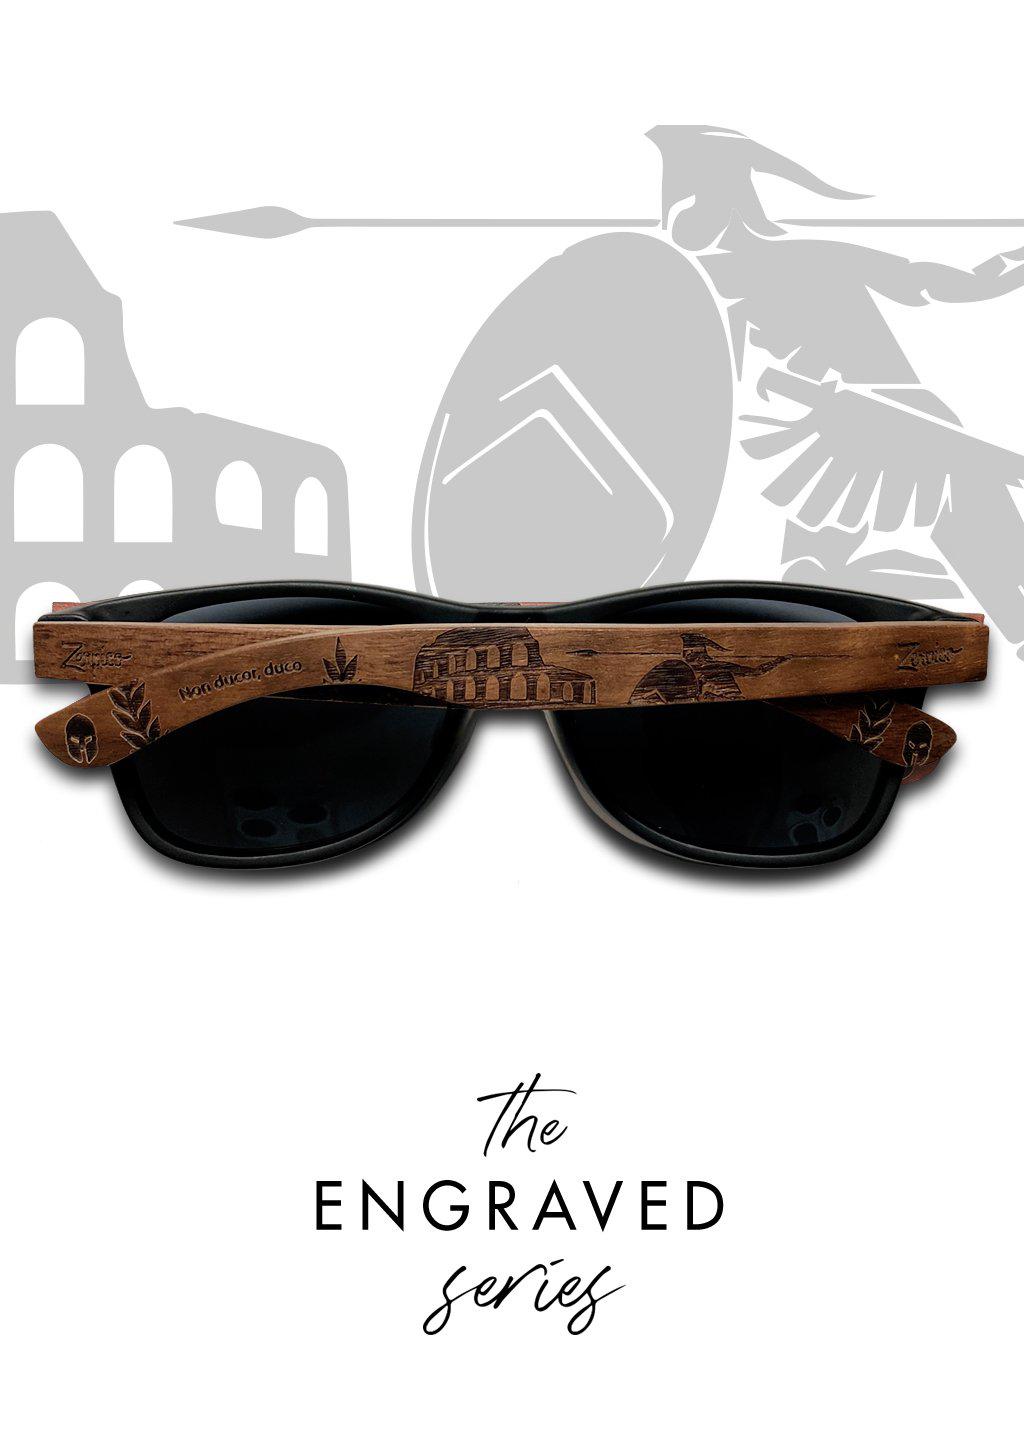 Engraved wooden sunglasses - Gladiator is inspired of the Gladiators from Ancient Rome.